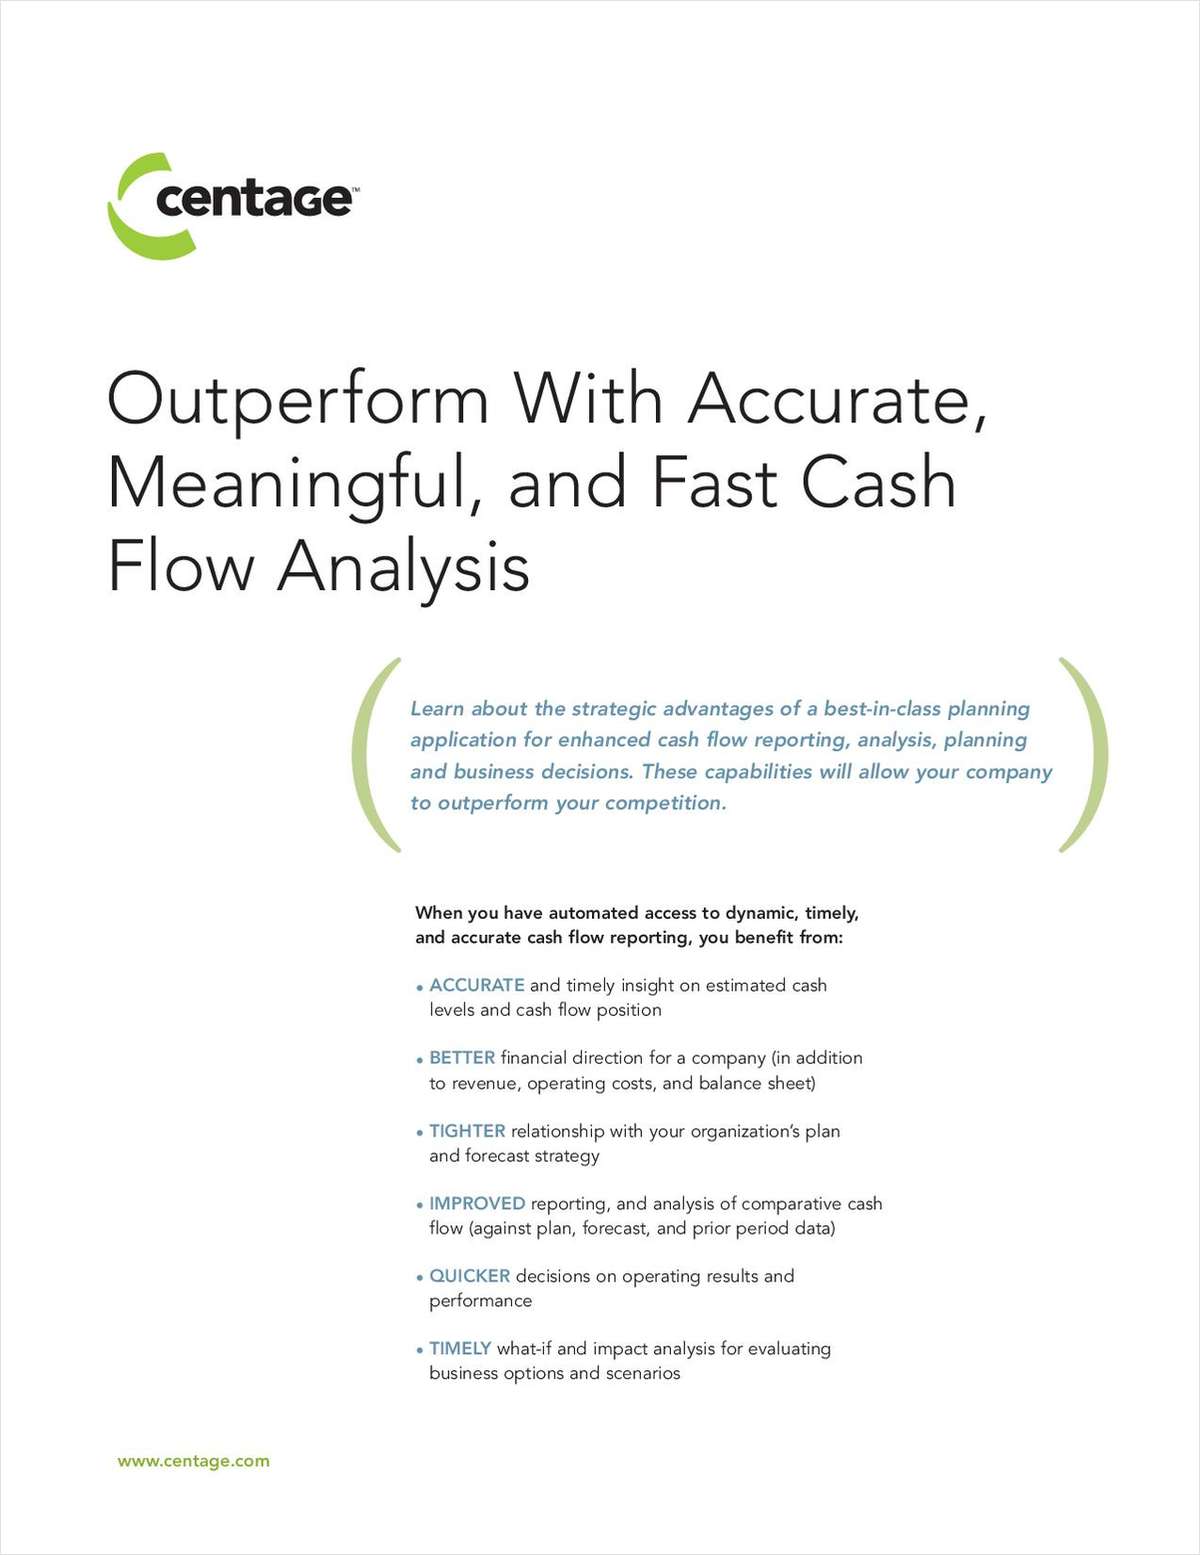 Outperform With Accurate, Meaningful, and Fast Cash Flow Analysis